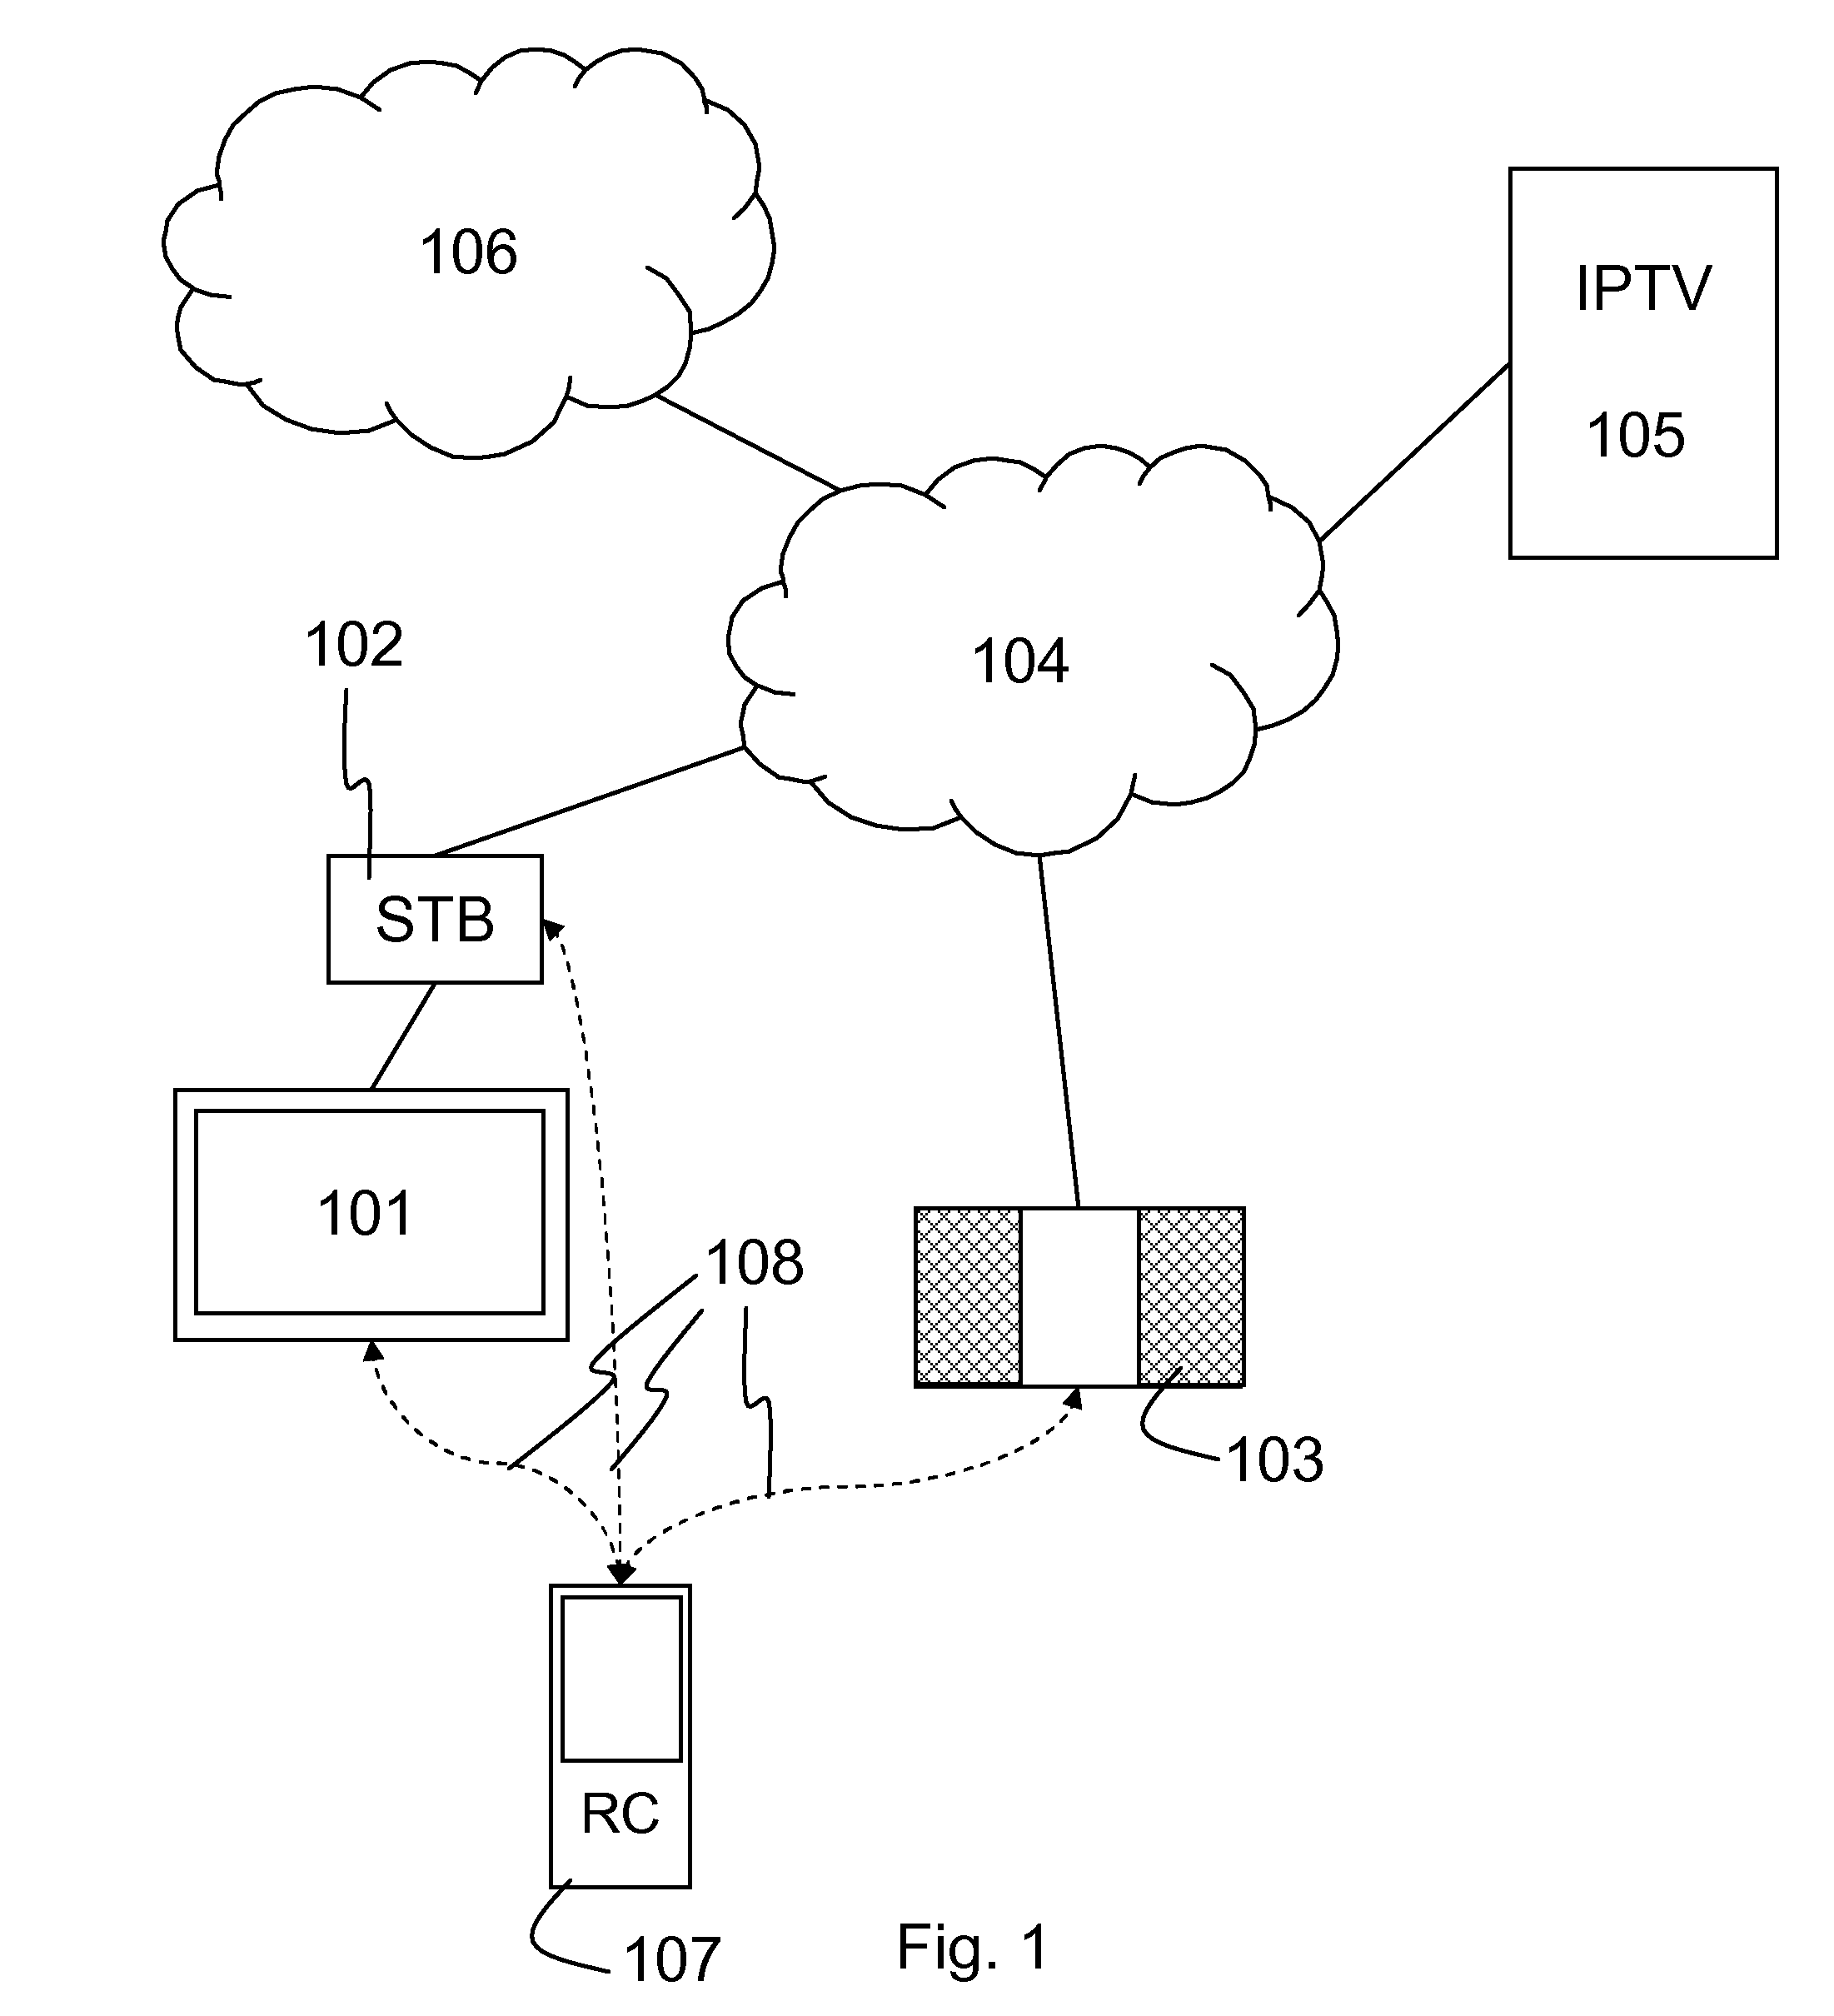 Remote control for devices with connectivity to a server delivery platform